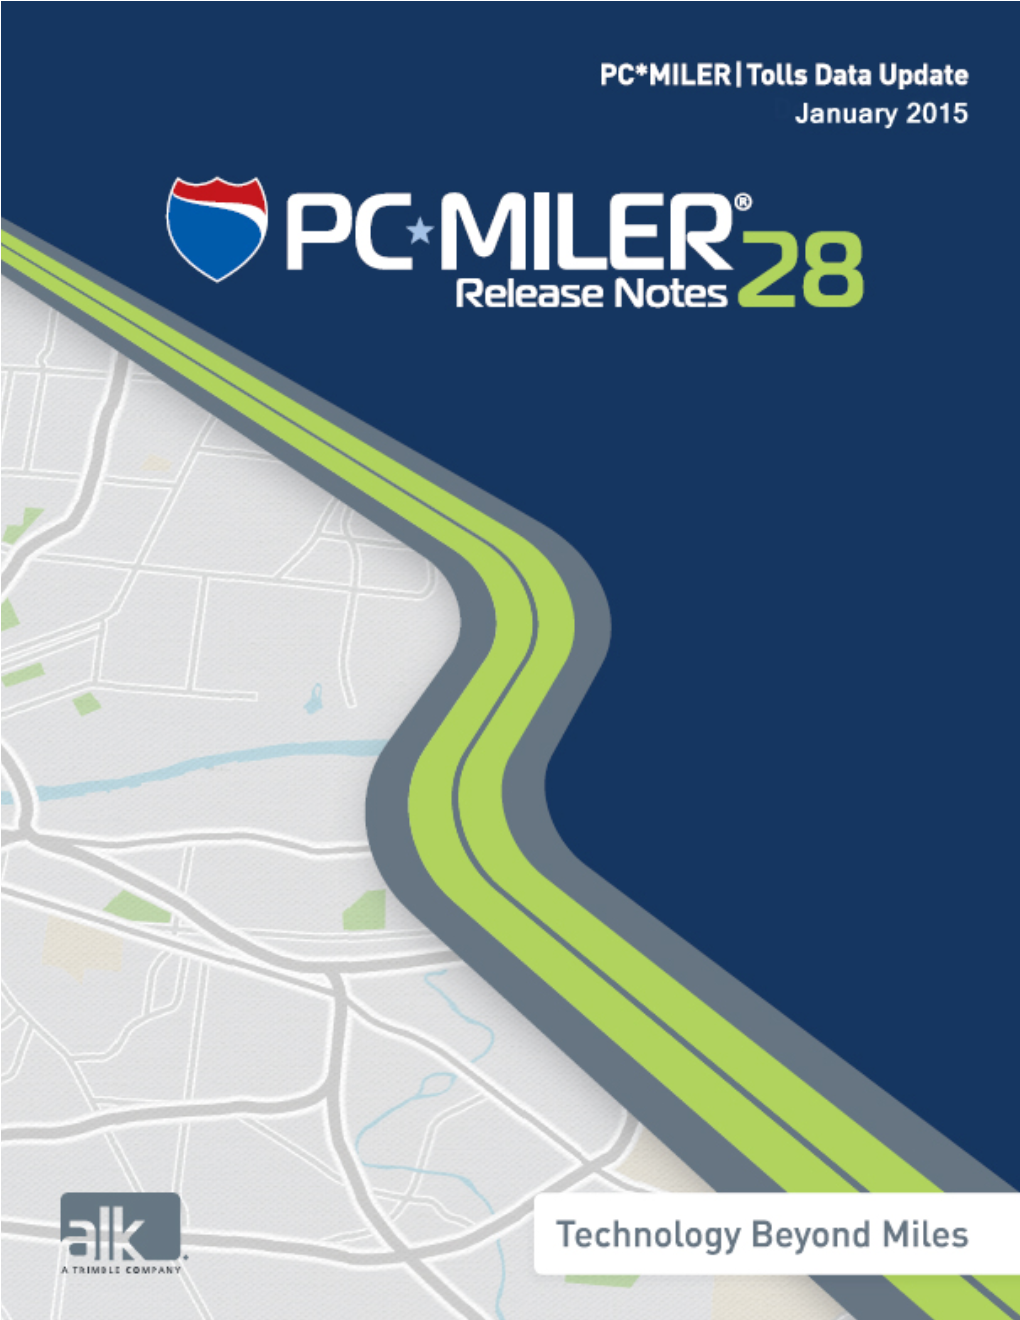 Release Notes | PC*MILER|Tolls Data Update Page| 2